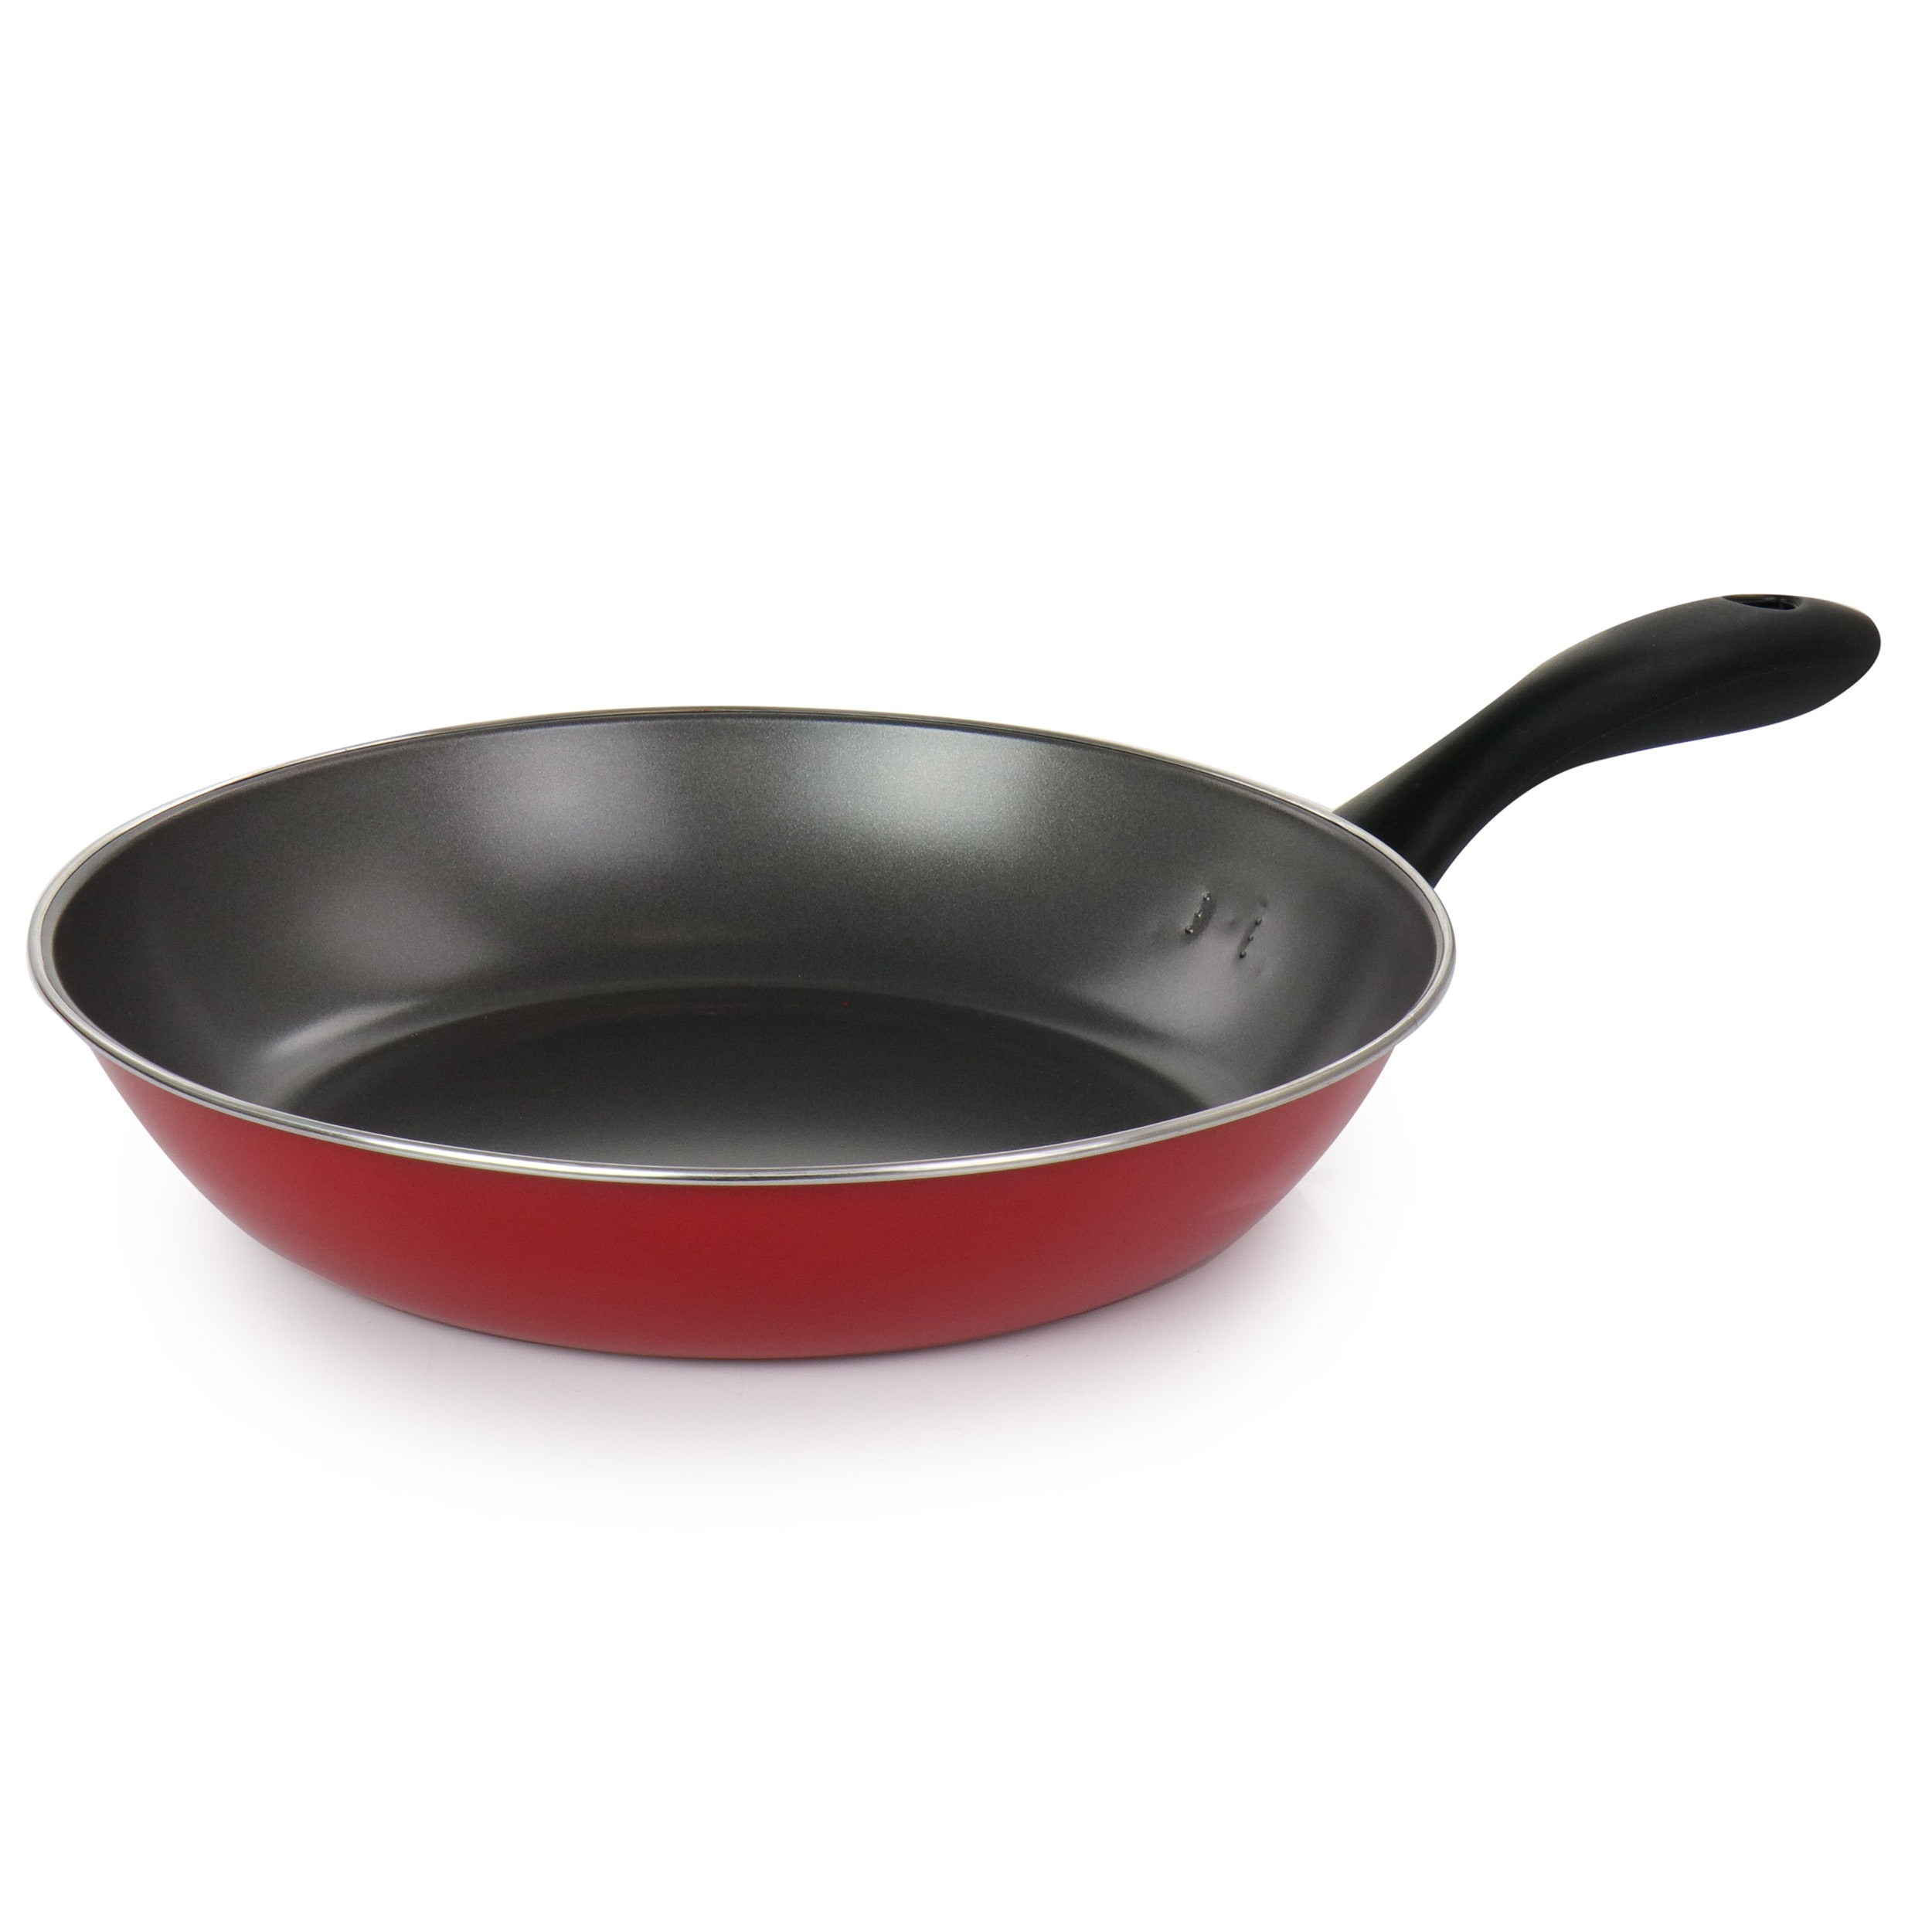 https://ak1.ostkcdn.com/images/products/is/images/direct/cf65a068b2d2620b0380b8a1fbb0e5ce6af4018b/Gibson-Home-Armada-7-Piece-Nonstick-Carbon-Steel-Cookware-Set-in-Red.jpg